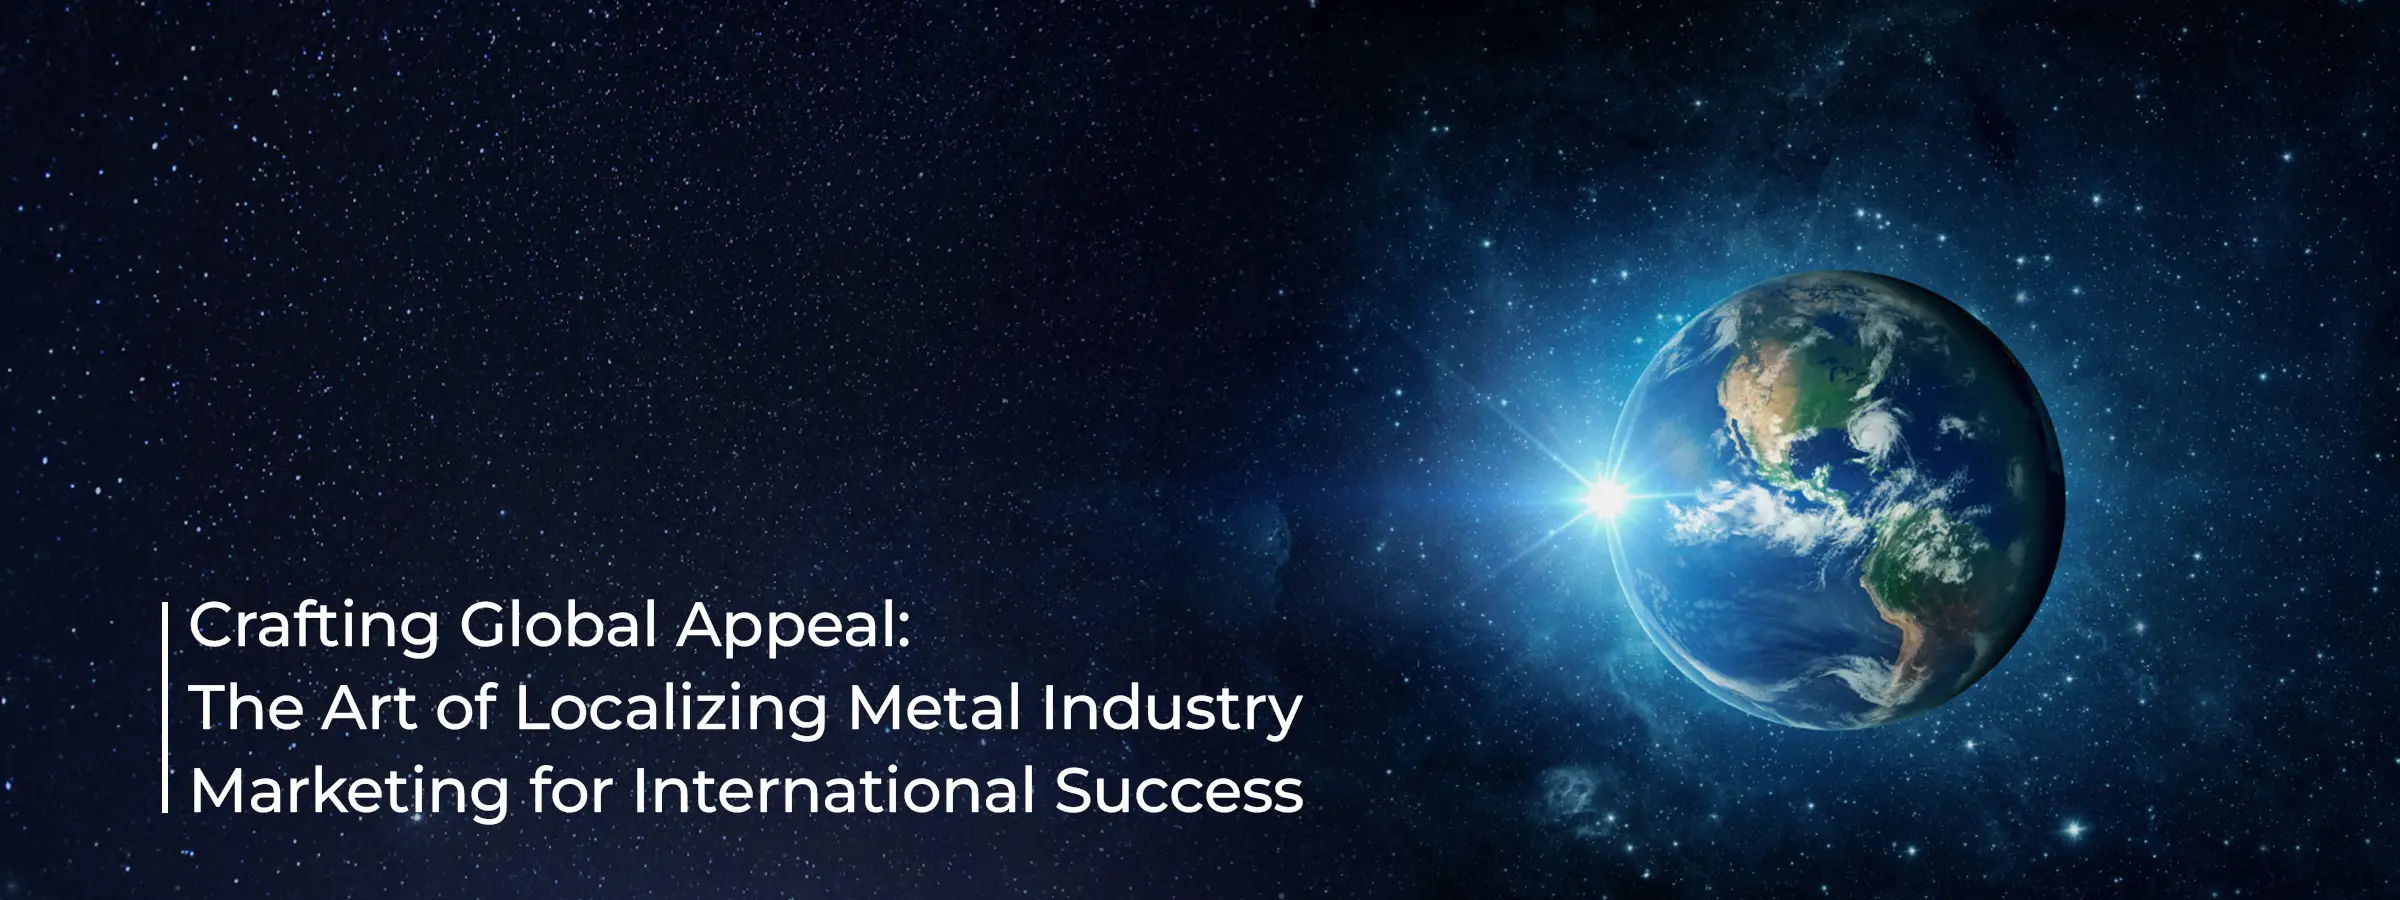 crafting-global-appeal-the-art-of-localizing-metal-industry-marketing-for-international-success